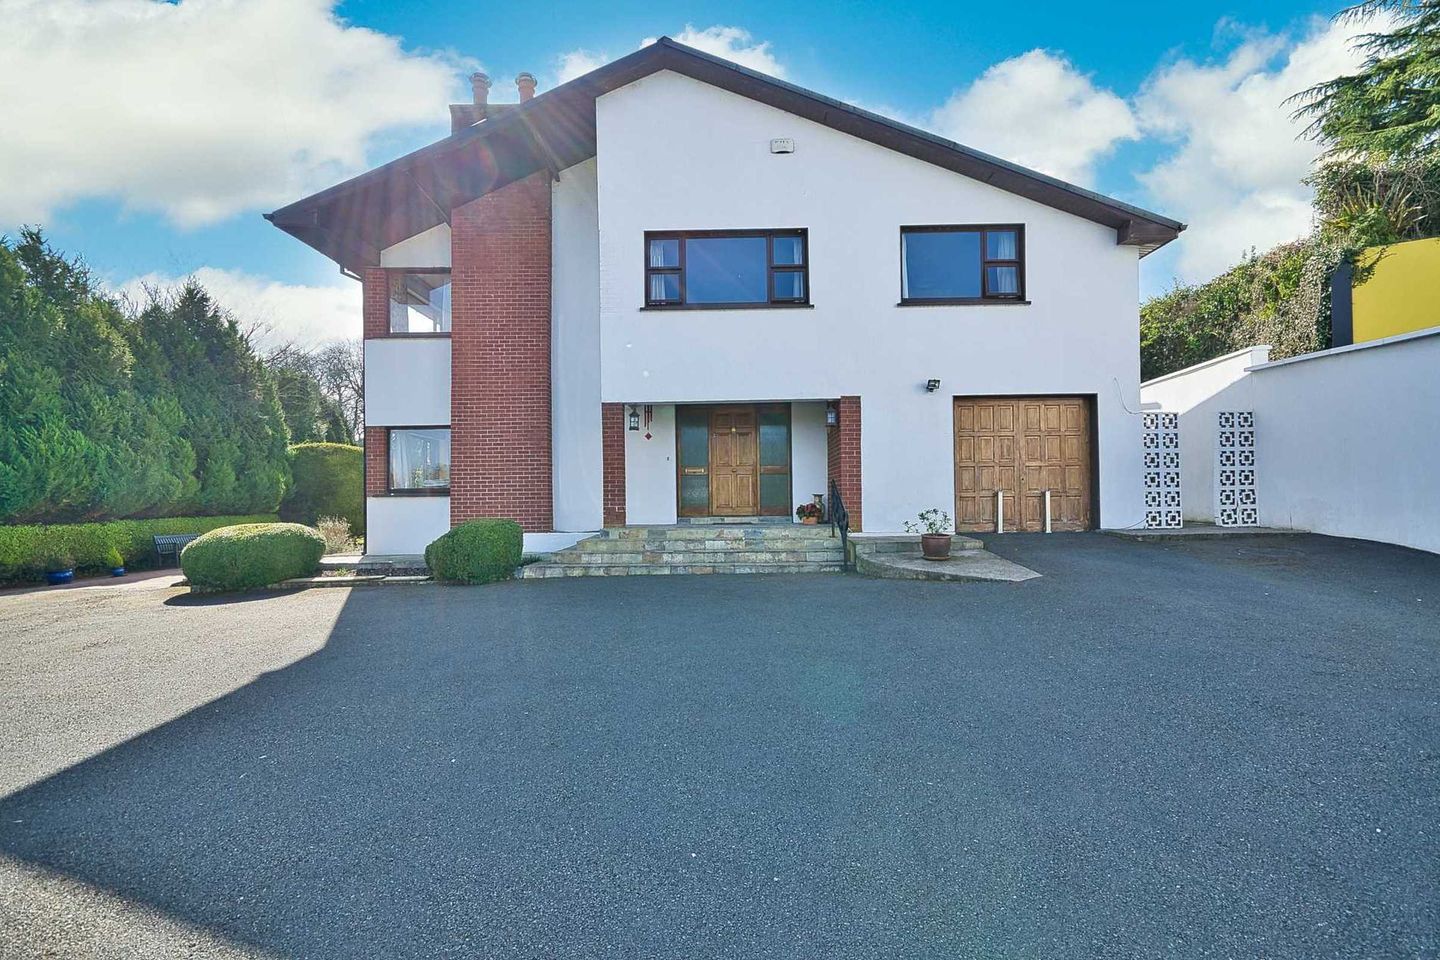 The Orchard, 9 Old Hill, Leixlip, Co. Kildare